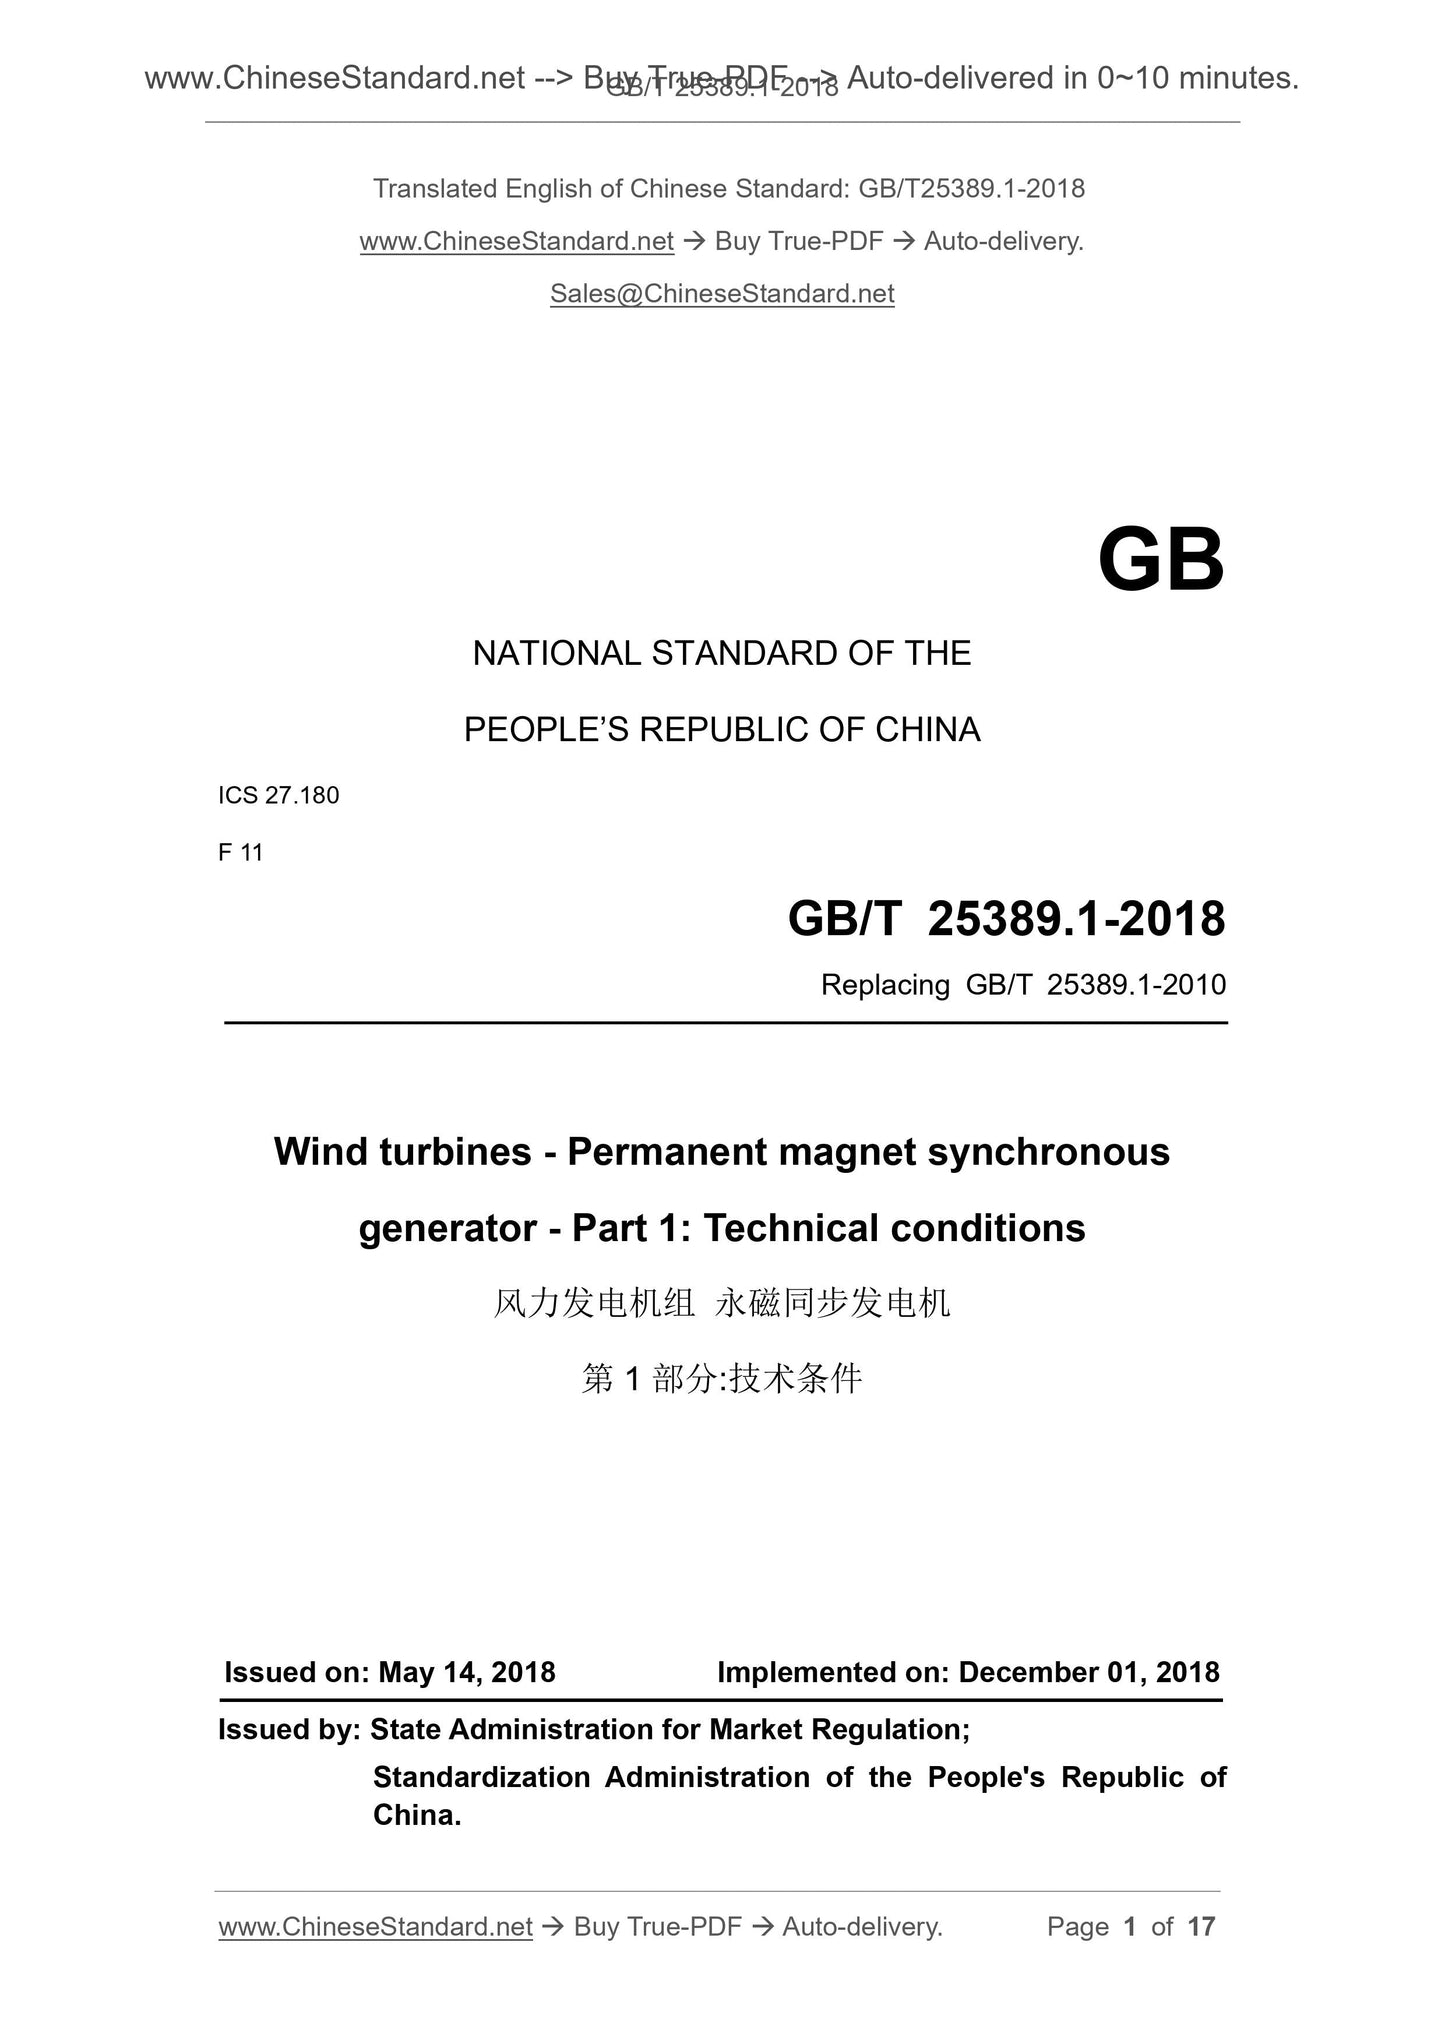 GB/T 25389.1-2018 Page 1